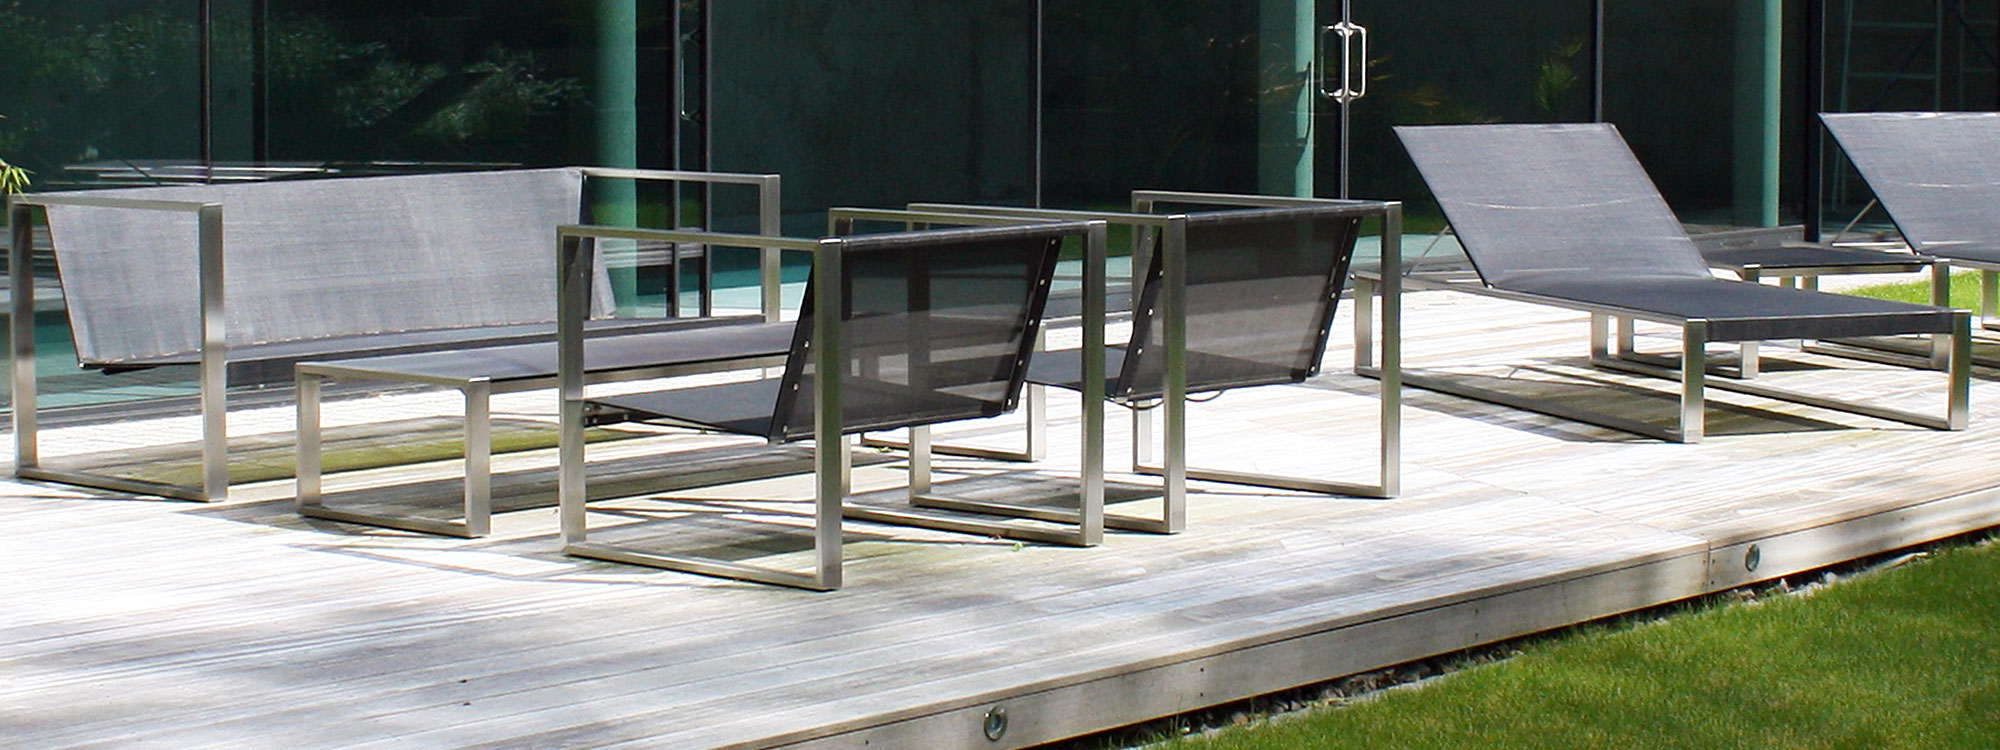 Image of FueraDentro Cima Lounge minimalist garden sofa and lounge chairs, which also look beautiful without cushions